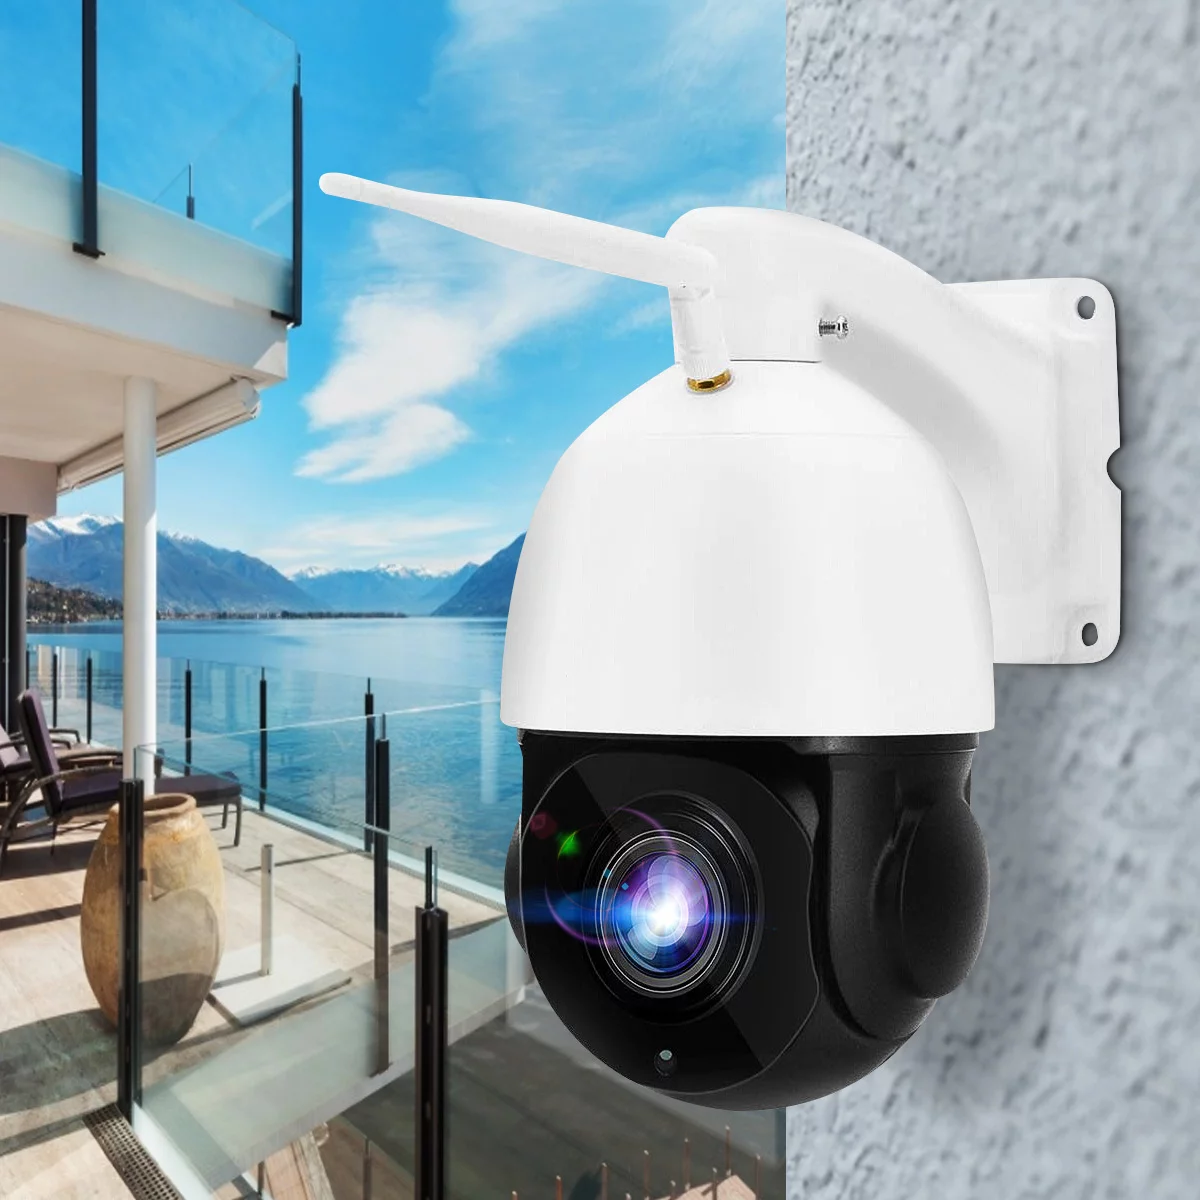 Wireless security cameras are closed-circuit television (CCTV) cameras that transmit a video and audio signal to a wireless receiver through a radio band